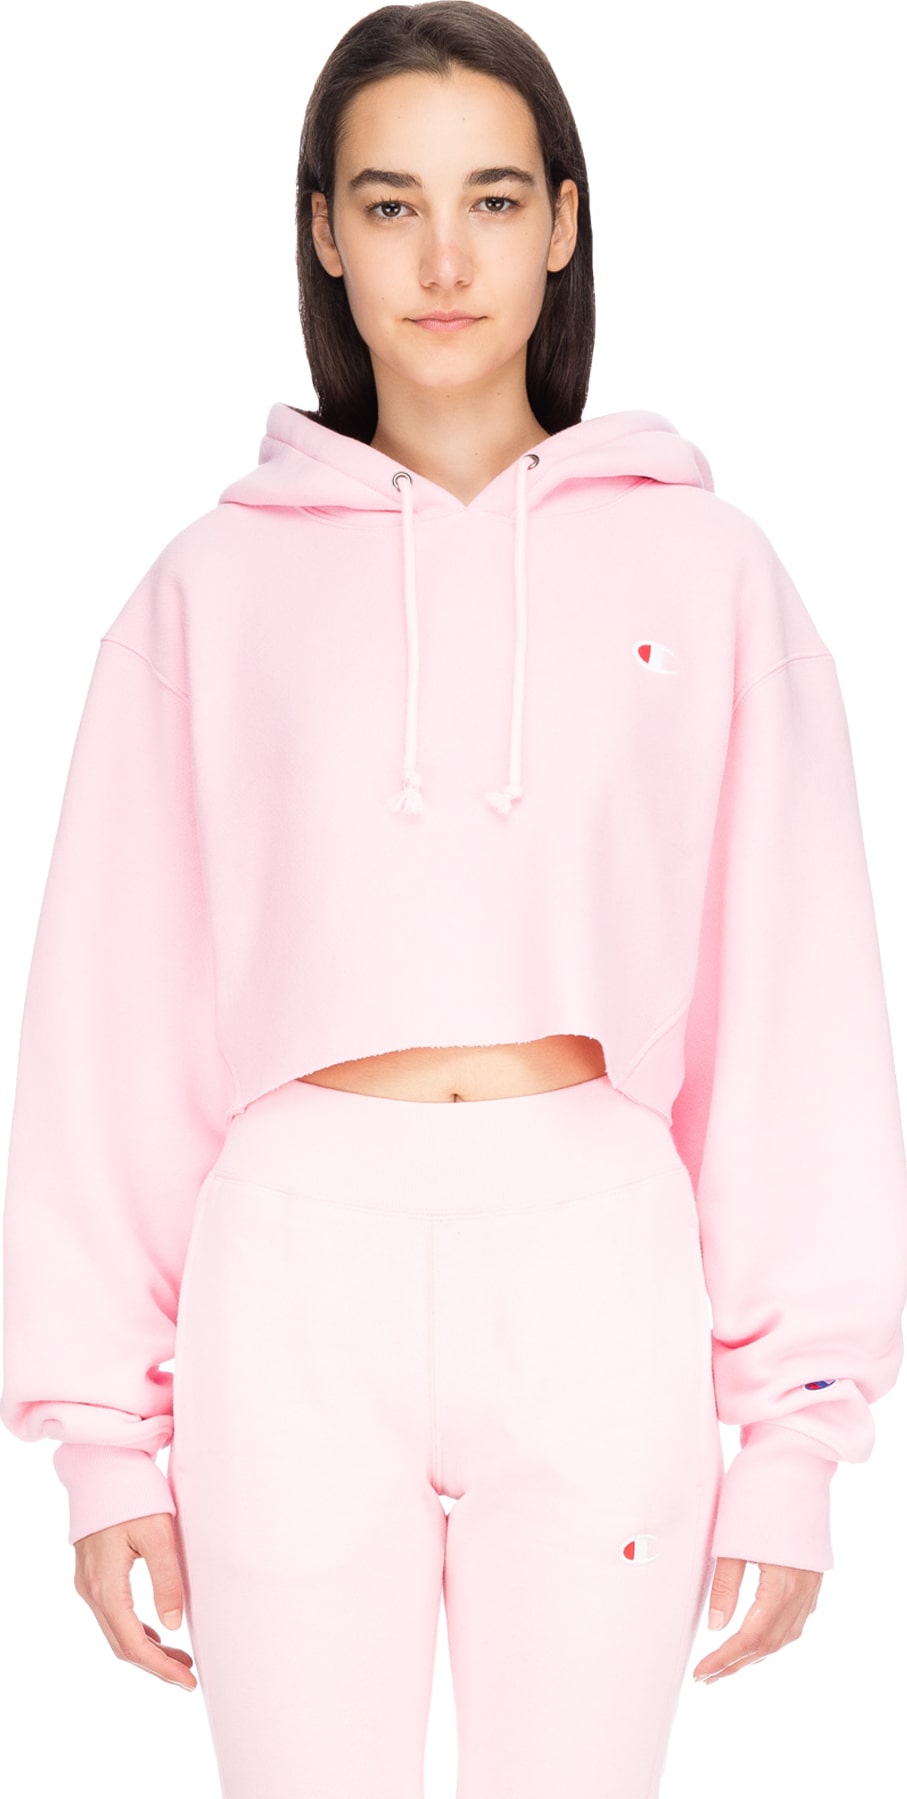 candy pink champion hoodie